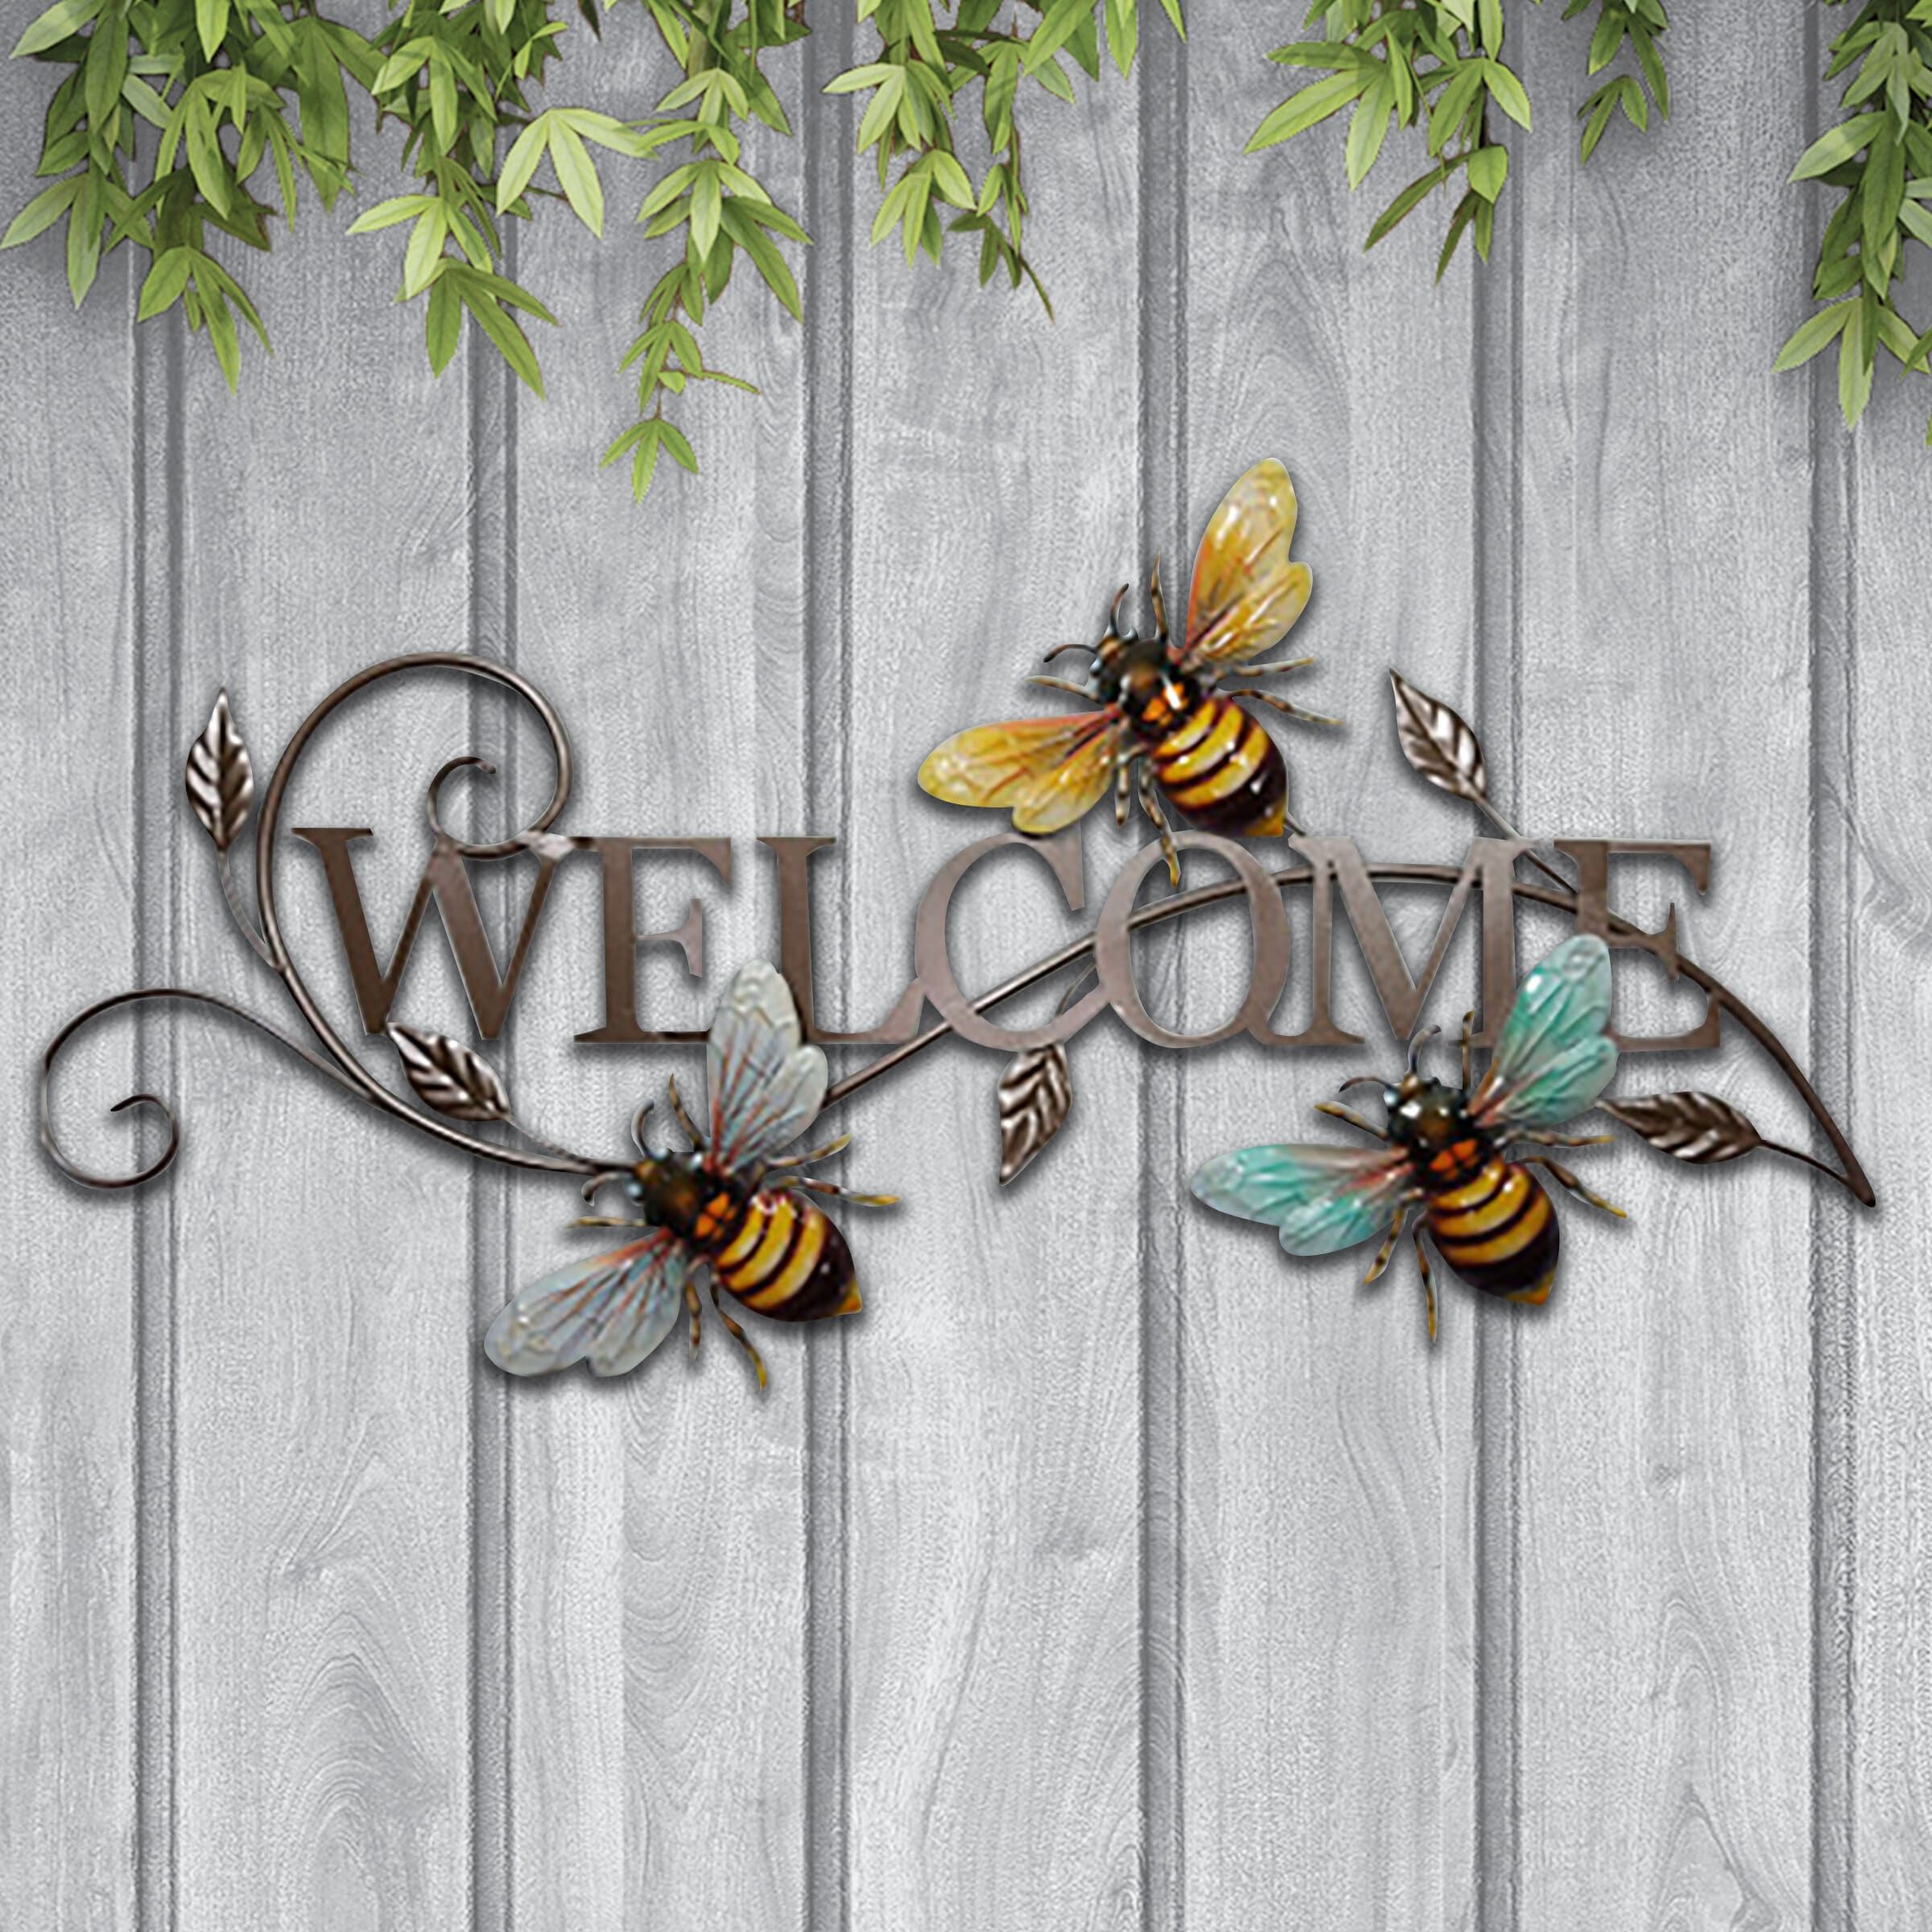 Metal Bumble Bees Welcome Sign Wall Art – Mirrorbee® Throughout Latest Metal Wall Bumble Bee Wall Art (View 17 of 20)